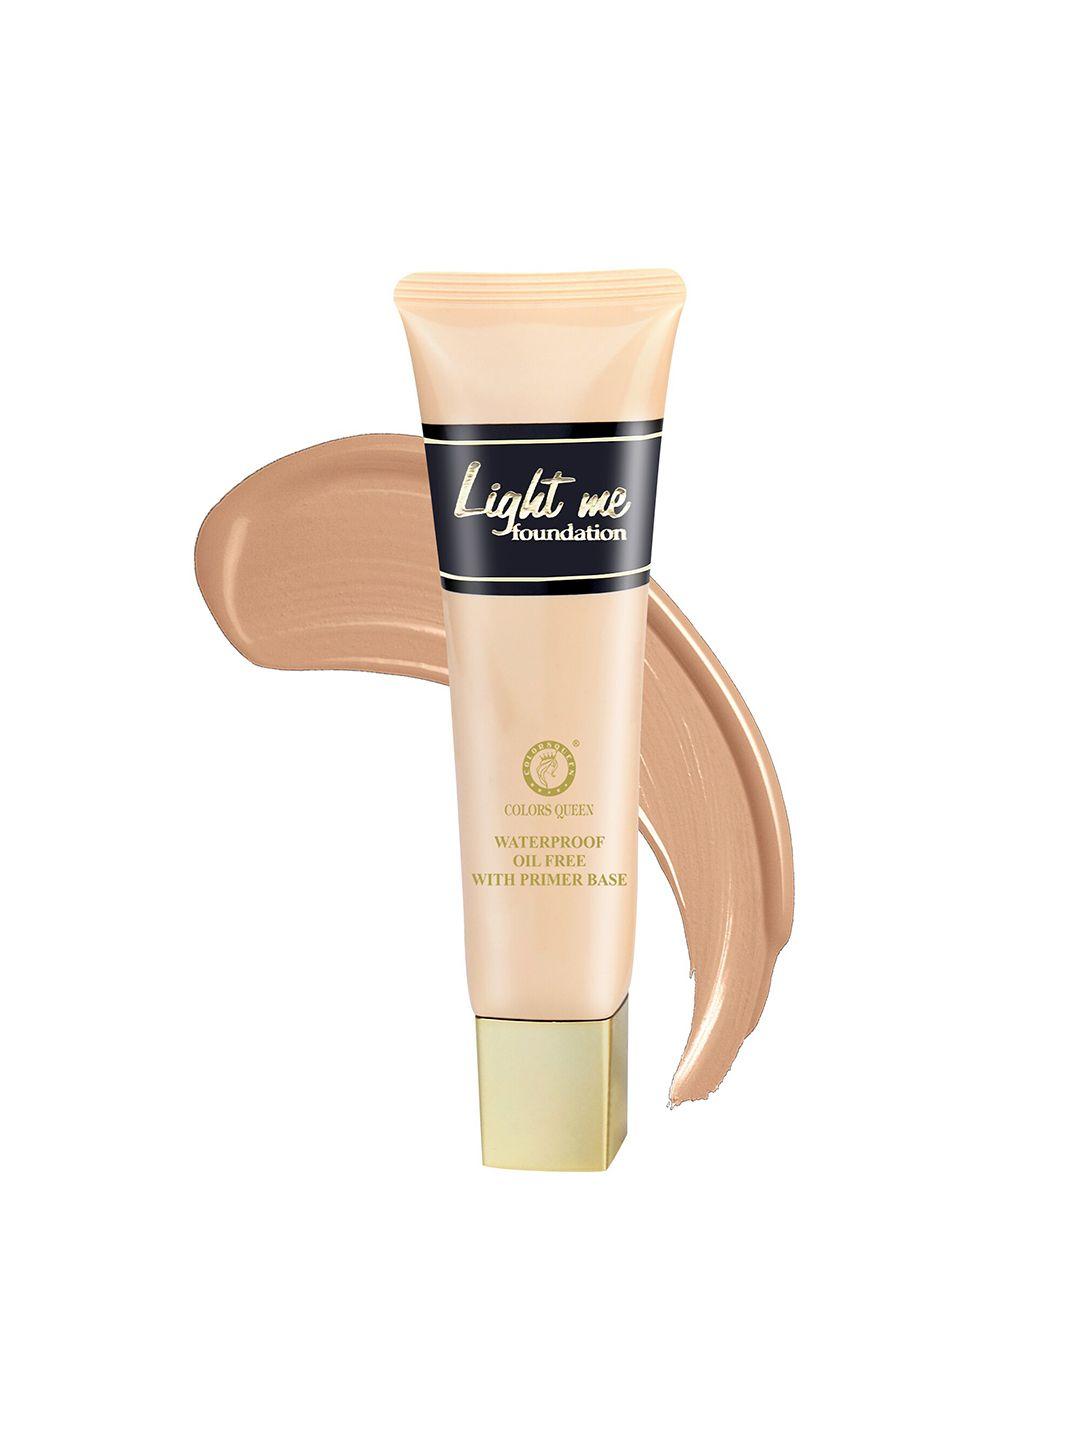 colors queen waterproof light me foundation with primer base 50 ml - natural shell 04